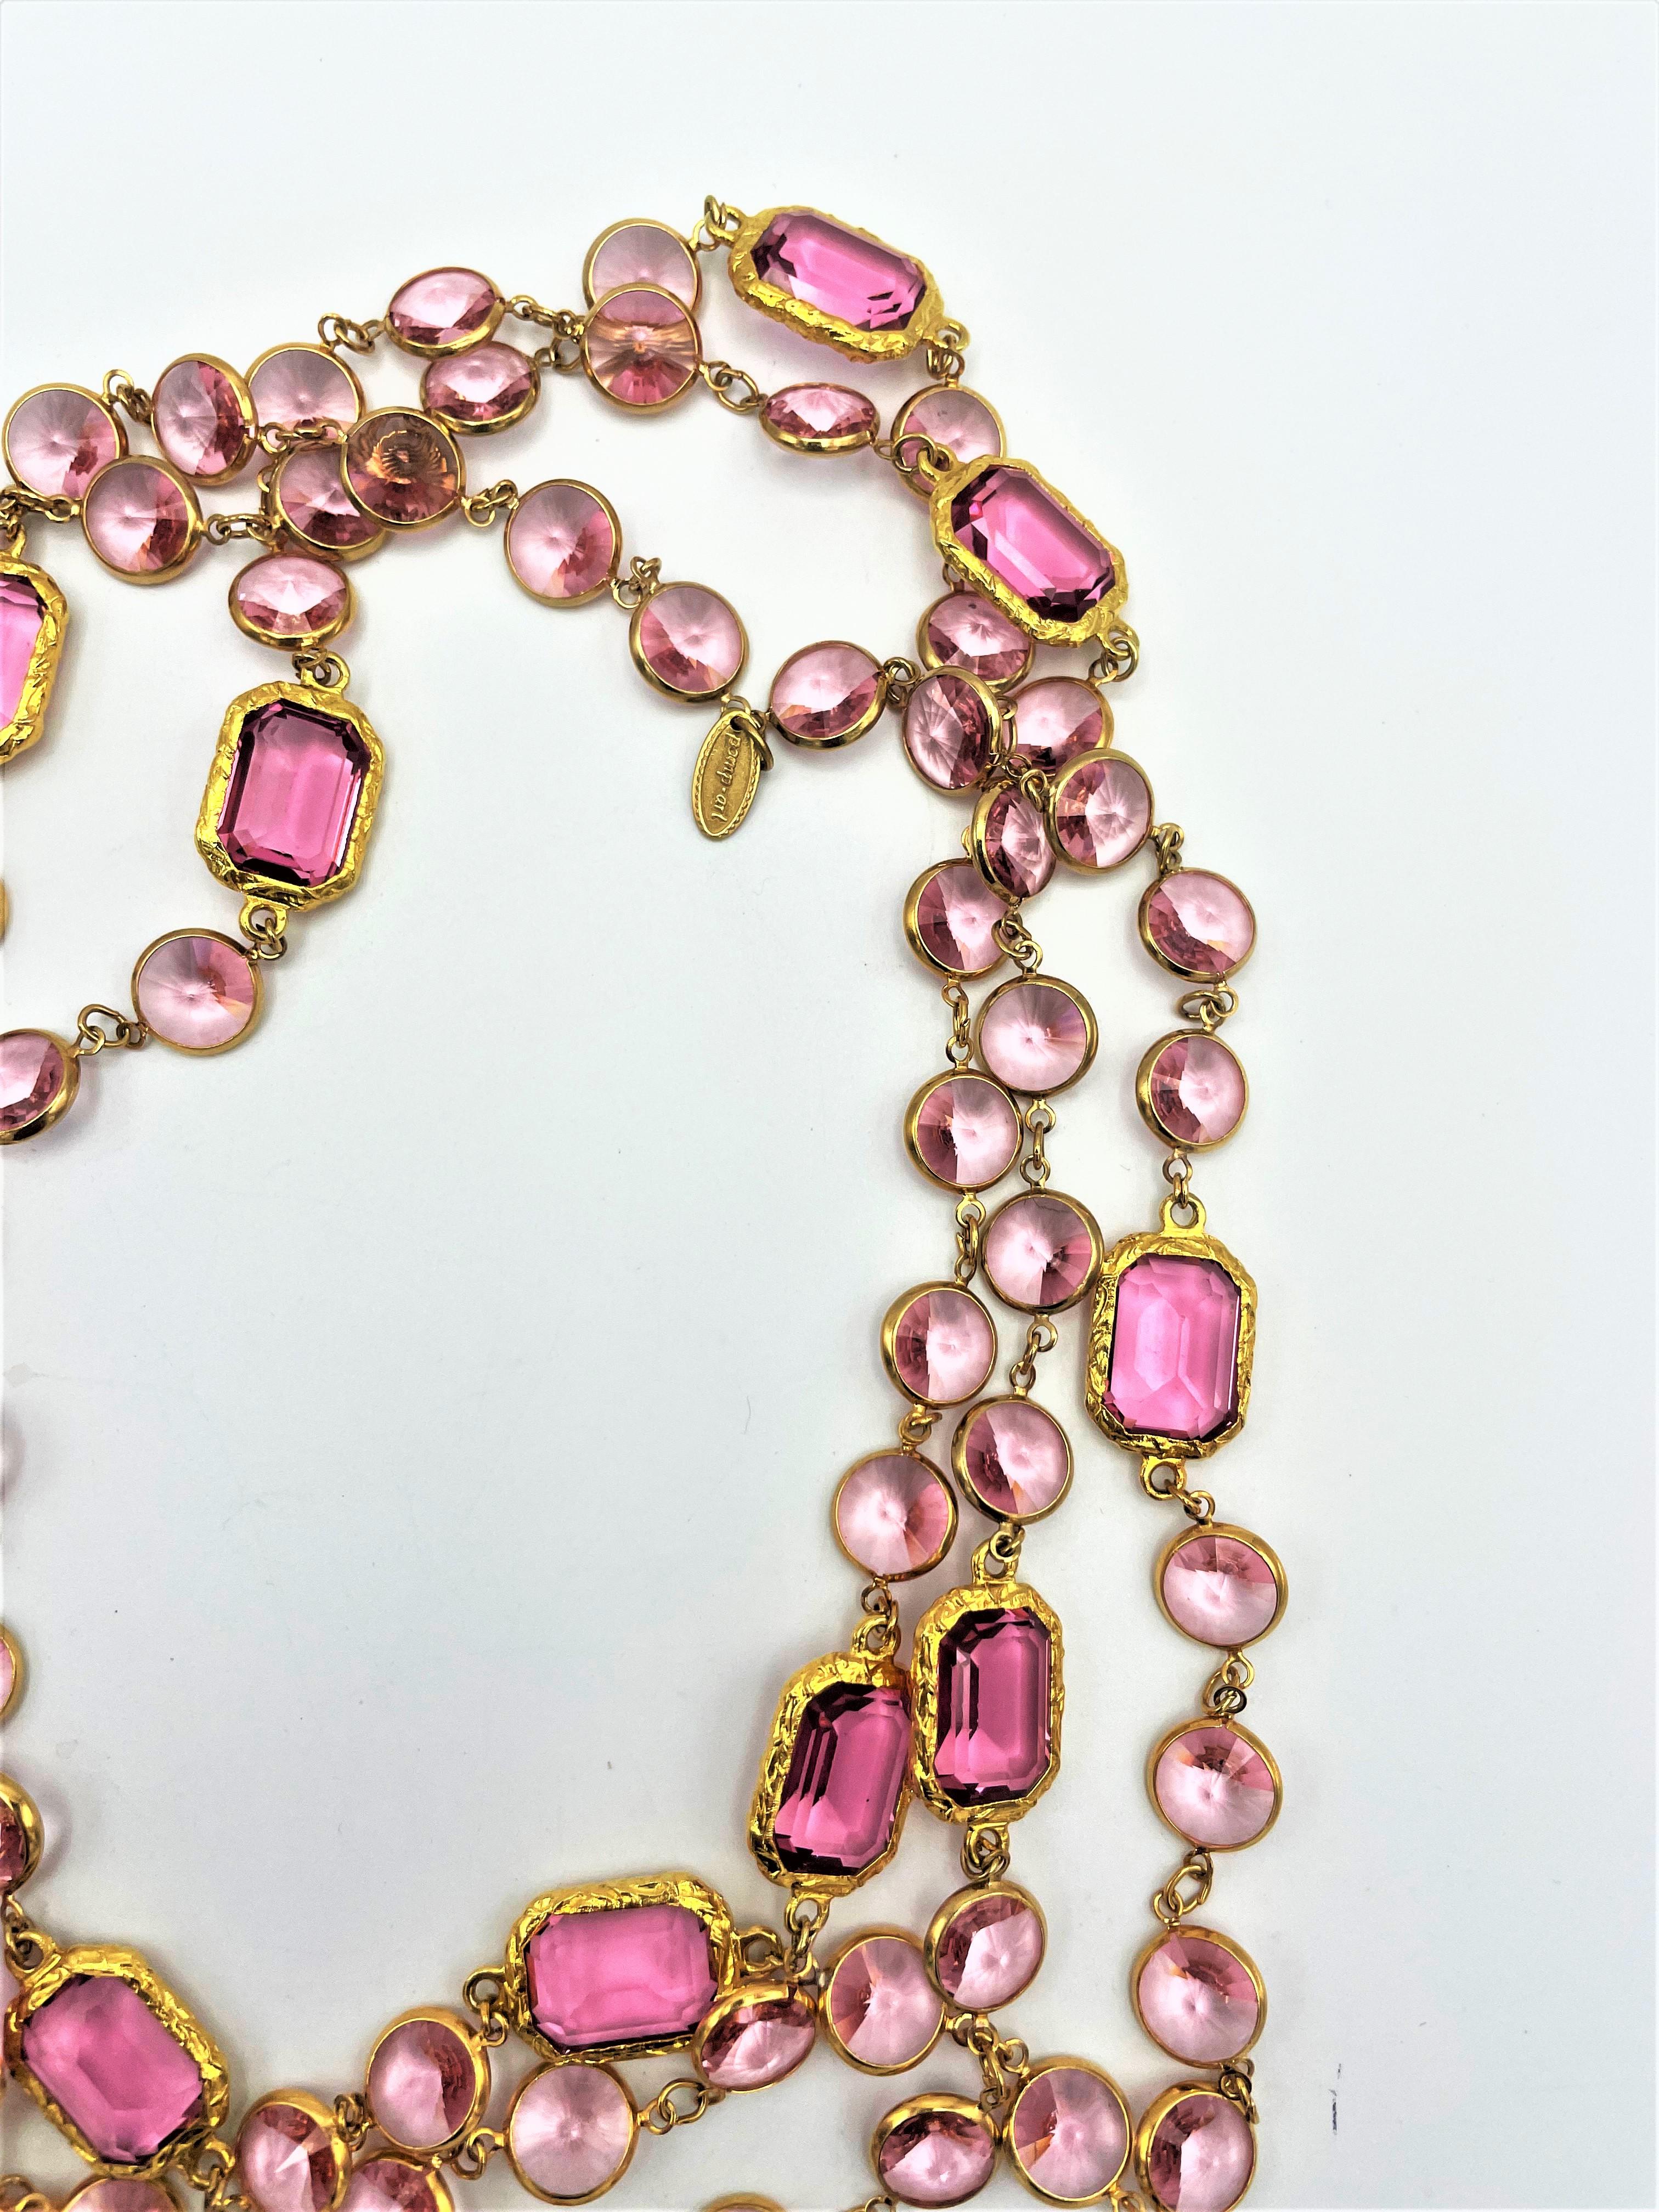 Octagon Cut  Necklace like the Chanel Chanel, pink Swarovski crystals gold plated, new  